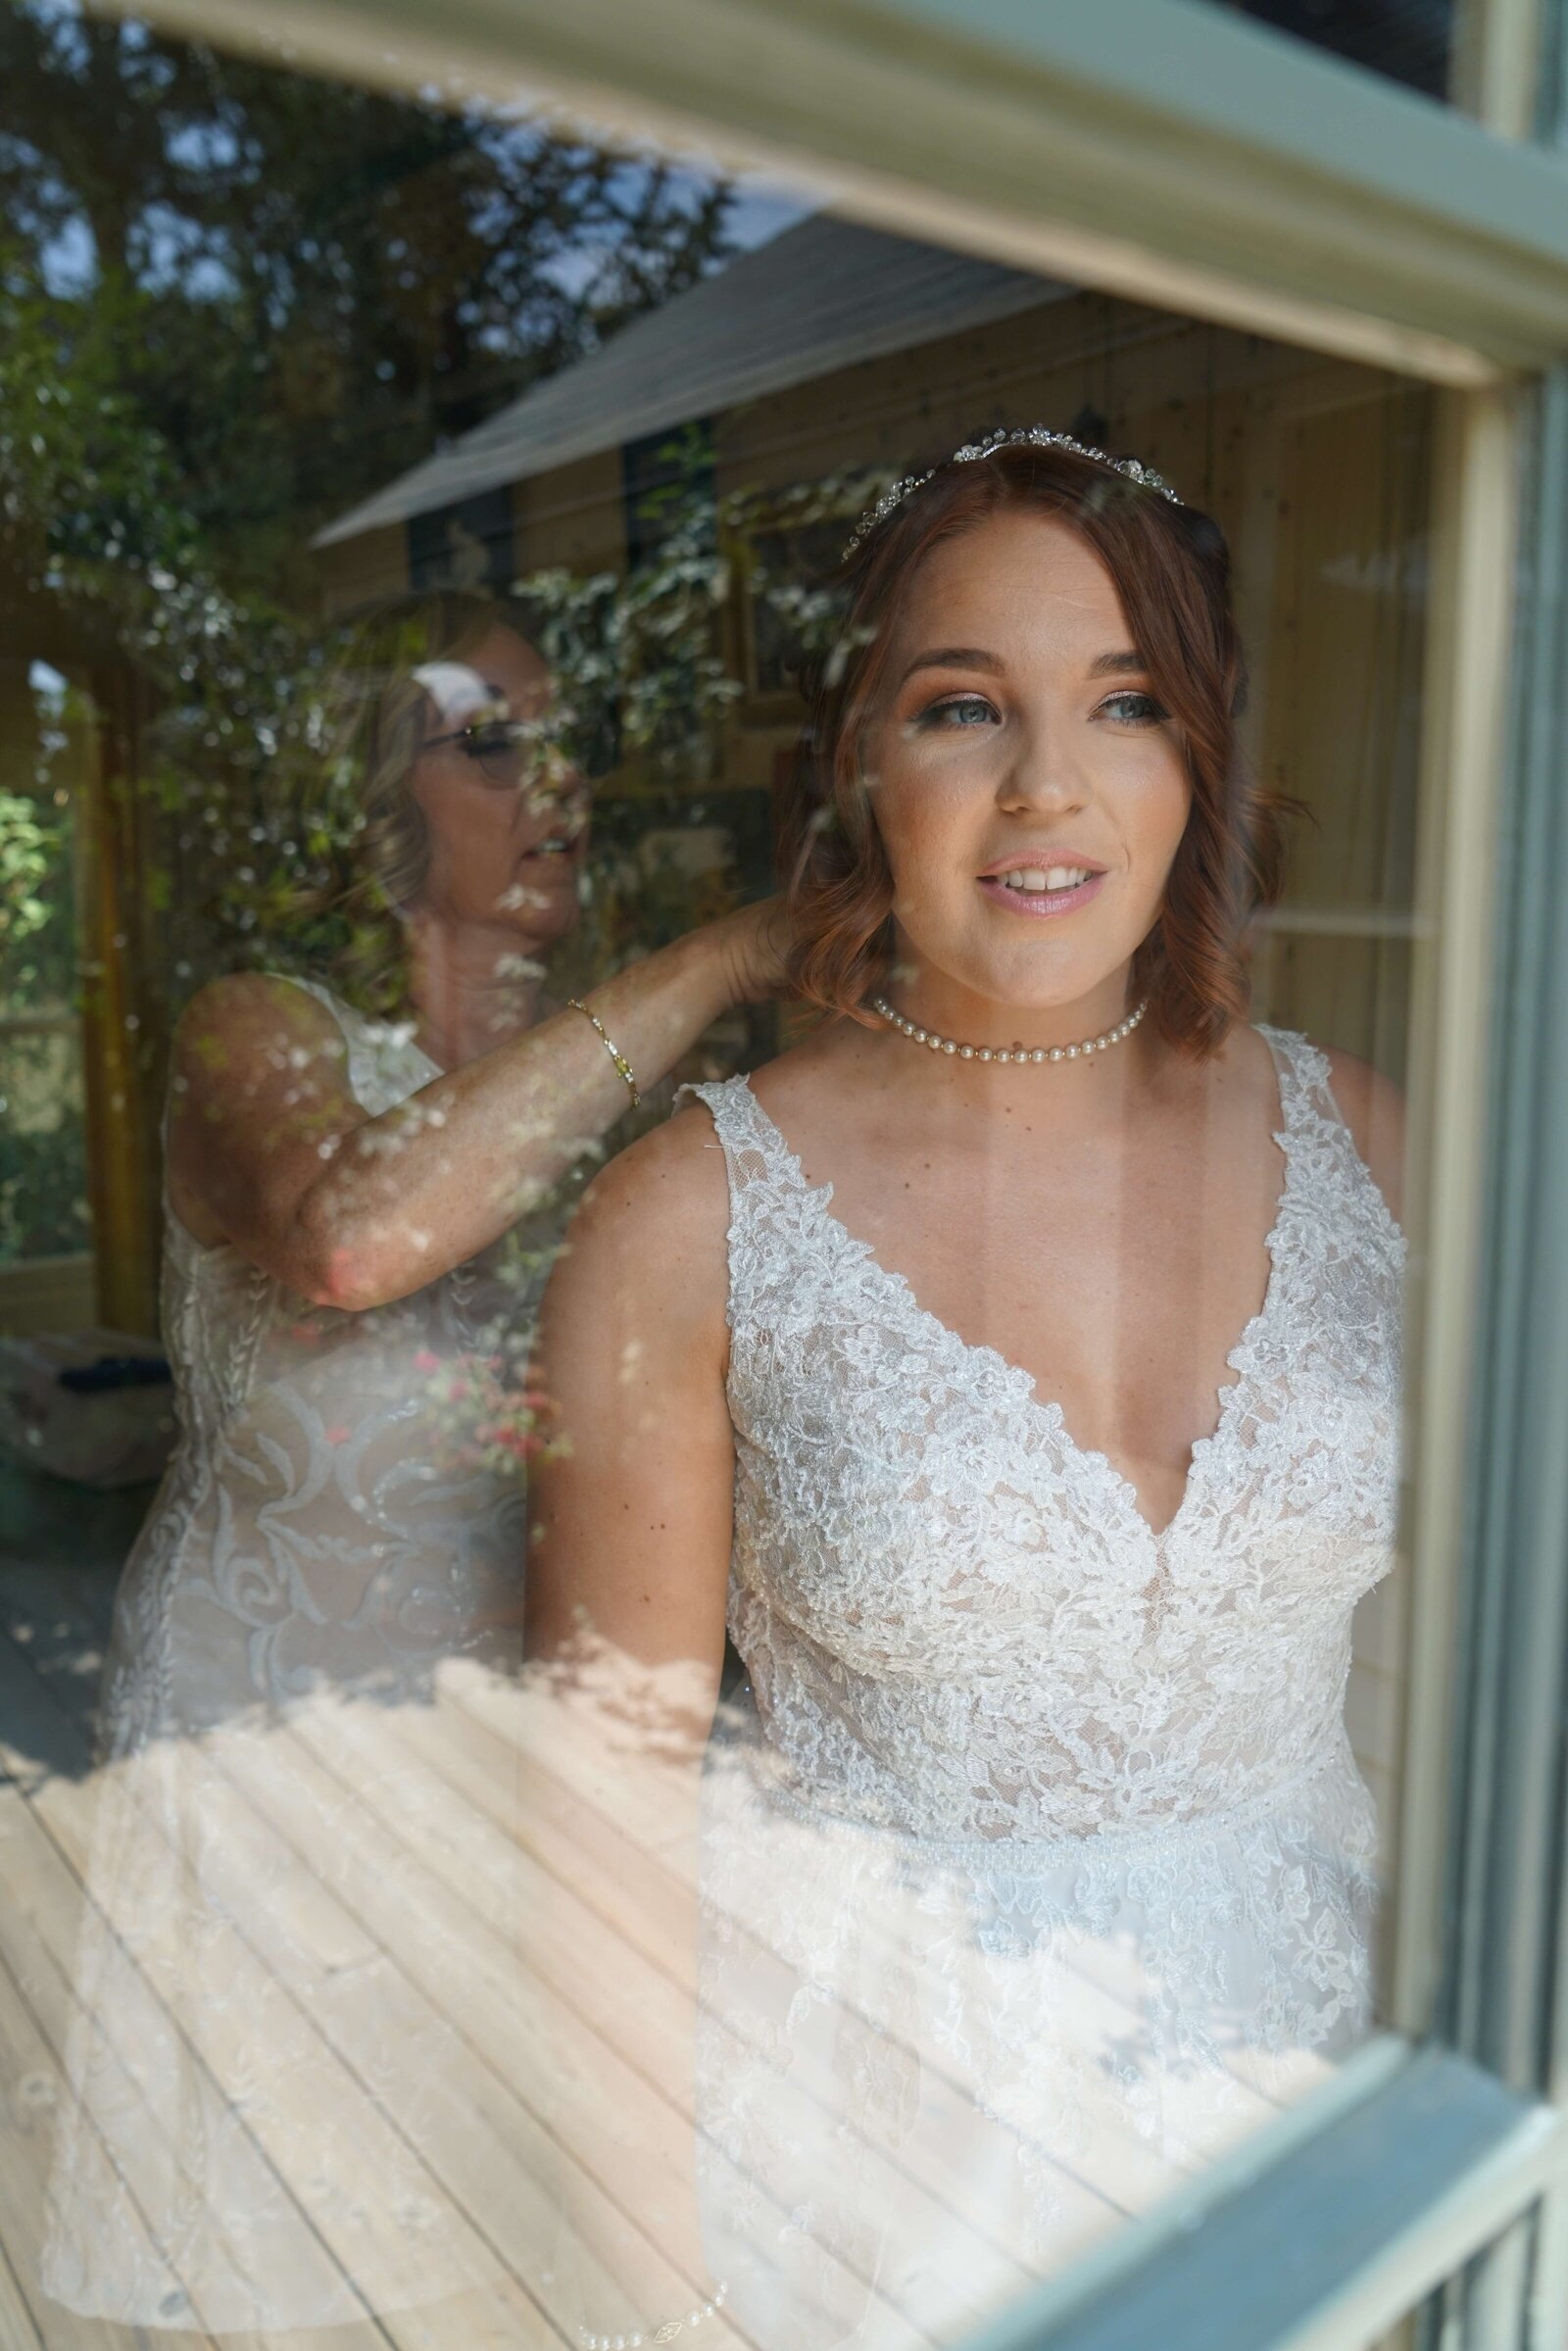 Newport Beach Wedding Photographer portrait of bride looking out window while the mother of the bride puts on her necklace